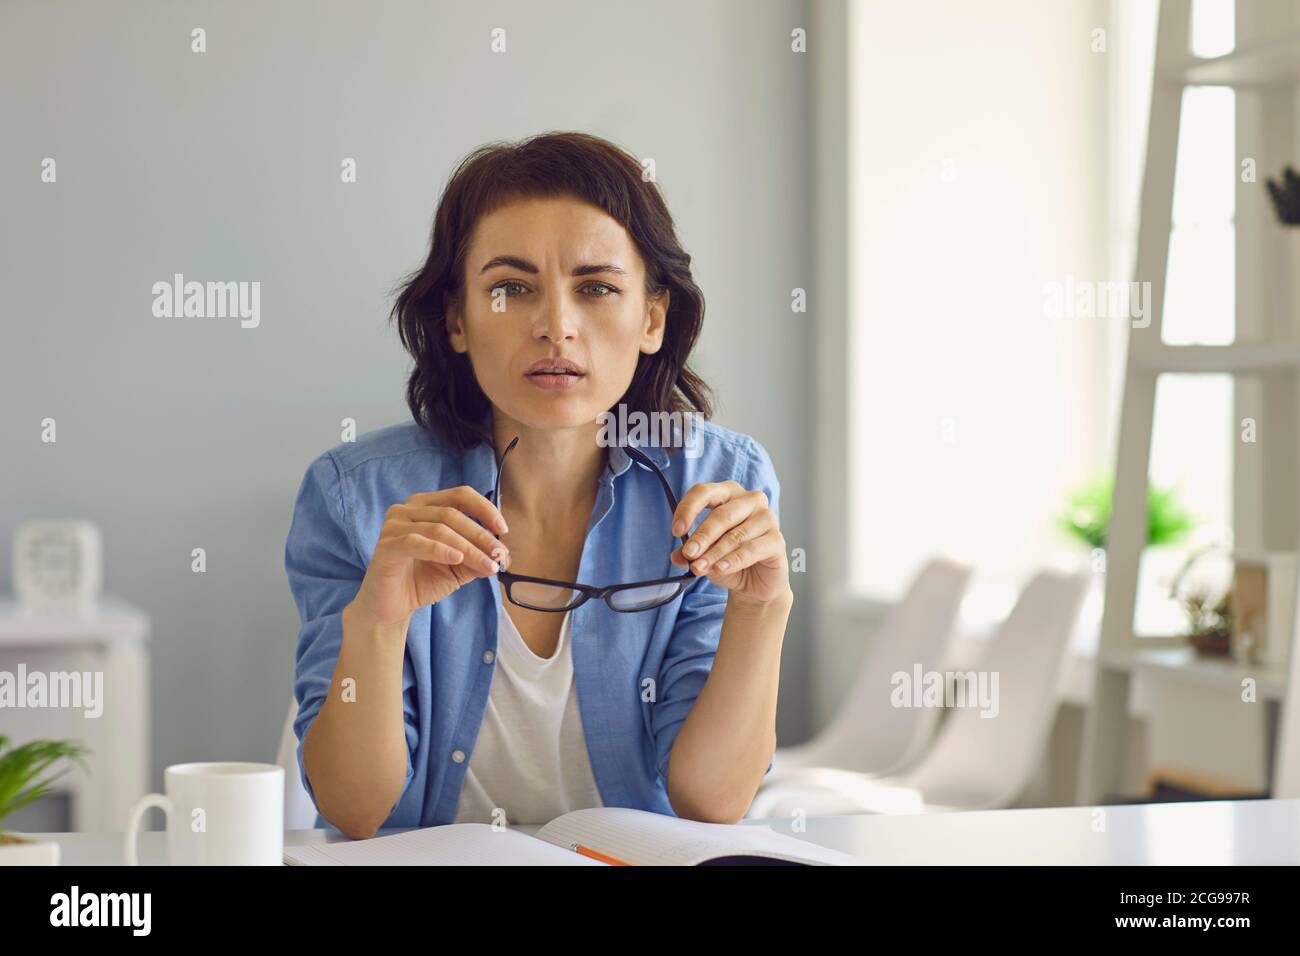 Young attentive woman looking at web camera during online meeting Stock Photo